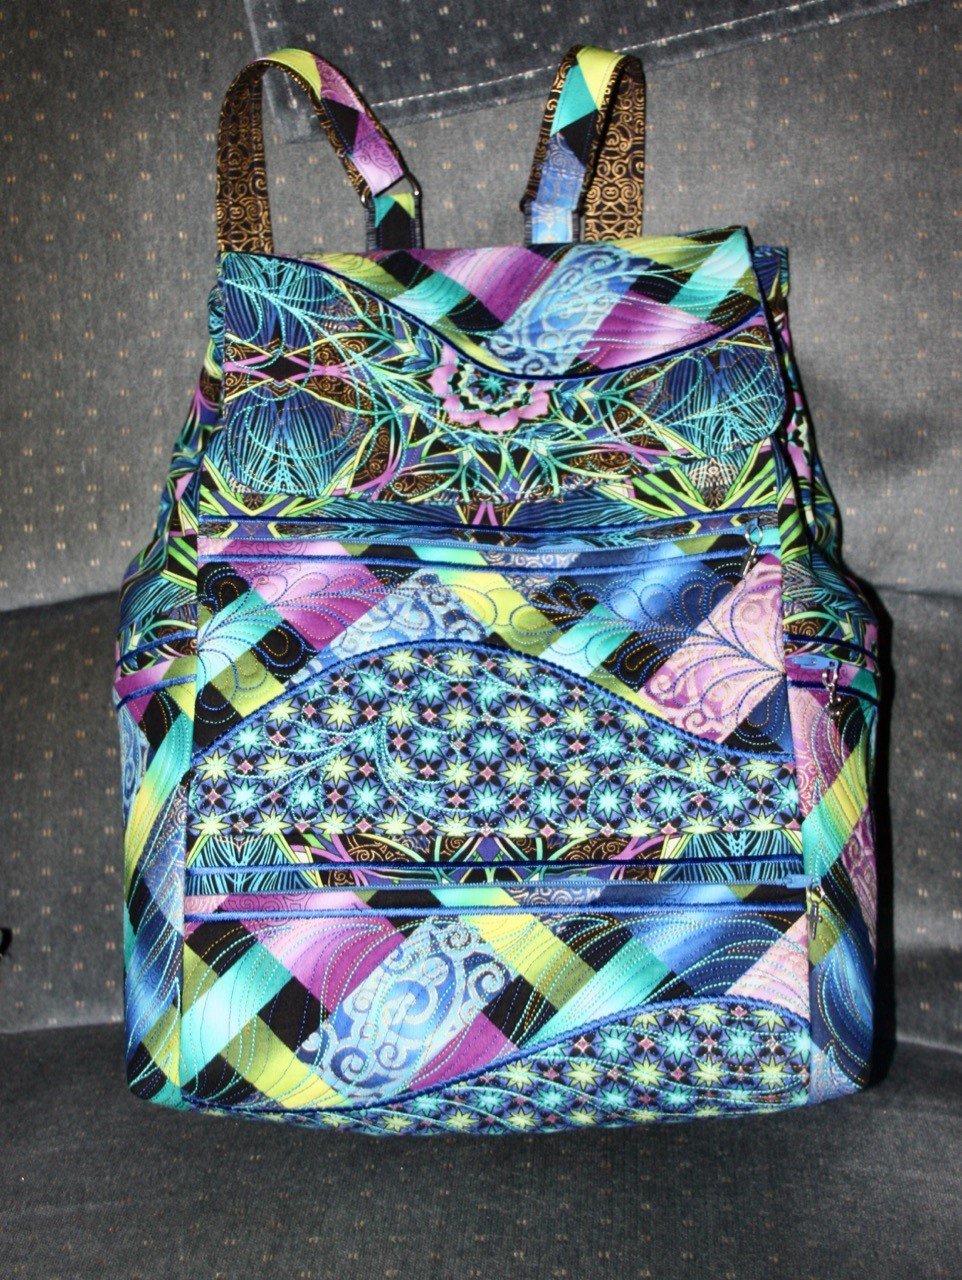 Freeform Quilted Backpack 5x7 6x10 - Sweet Pea Australia